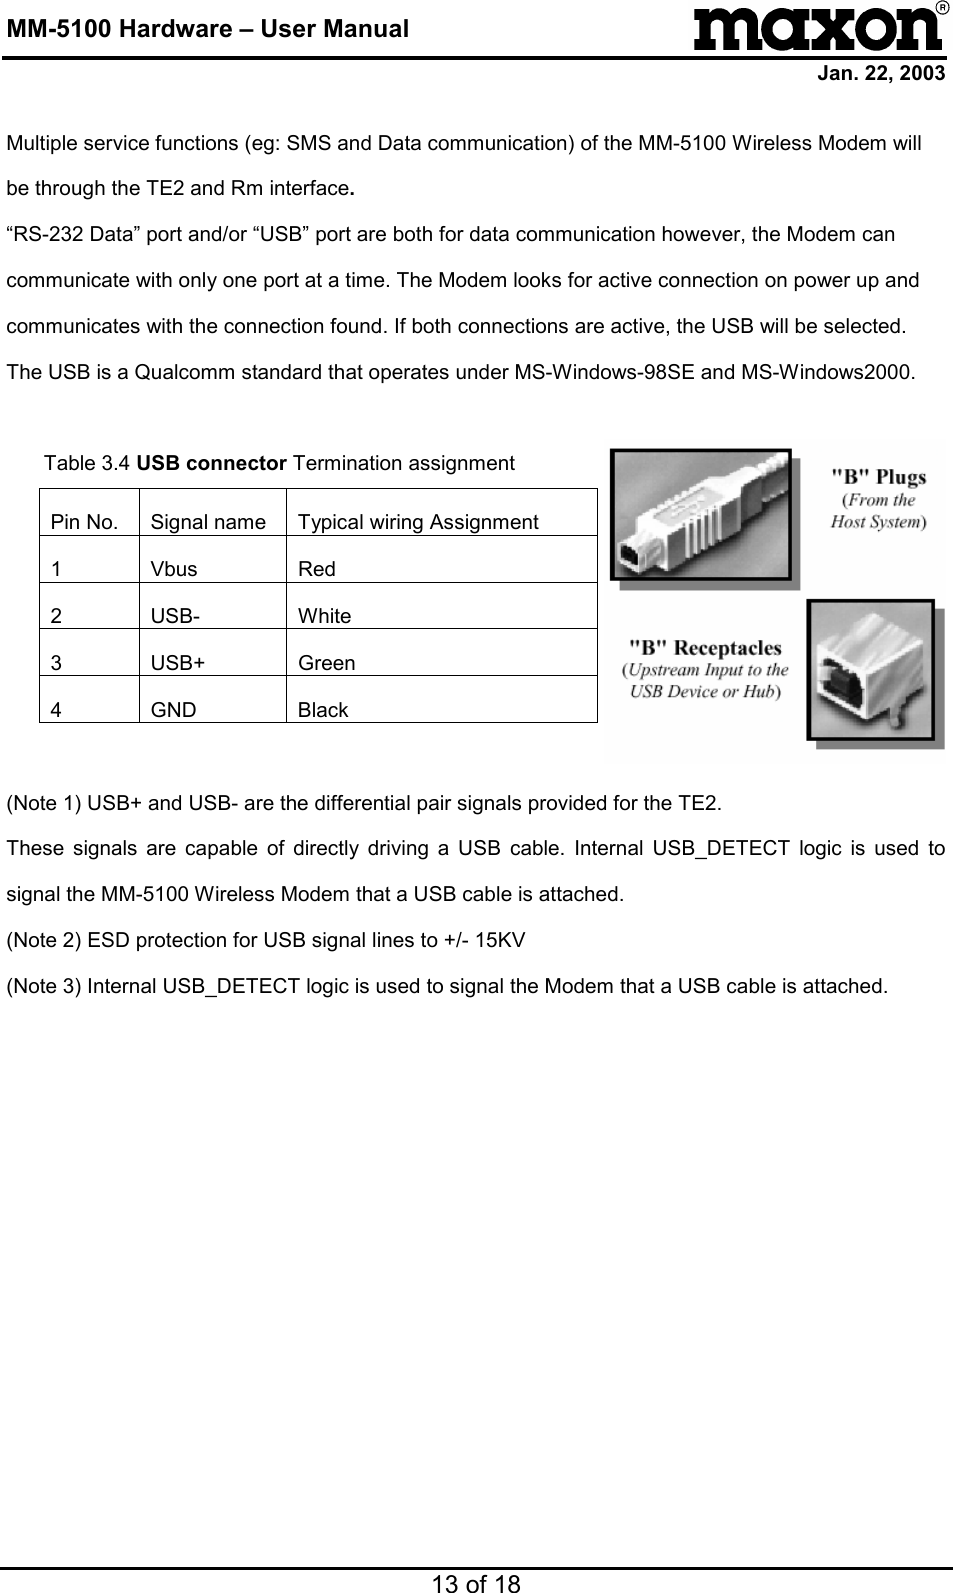 MM-5100 Hardware – User Manual Jan. 22, 2003 13 of 18 Multiple service functions (eg: SMS and Data communication) of the MM-5100 Wireless Modem will be through the TE2 and Rm interface. “RS-232 Data” port and/or “USB” port are both for data communication however, the Modem can communicate with only one port at a time. The Modem looks for active connection on power up and communicates with the connection found. If both connections are active, the USB will be selected. The USB is a Qualcomm standard that operates under MS-Windows-98SE and MS-Windows2000.  Table 3.4 USB connector Termination assignment  Pin No.  Signal name  Typical wiring Assignment 1 Vbus  Red 2 USB-  White 3 USB+  Green 4 GND  Black  (Note 1) USB+ and USB- are the differential pair signals provided for the TE2. These signals are capable of directly driving a USB cable. Internal USB_DETECT logic is used to signal the MM-5100 Wireless Modem that a USB cable is attached. (Note 2) ESD protection for USB signal lines to +/- 15KV (Note 3) Internal USB_DETECT logic is used to signal the Modem that a USB cable is attached.  